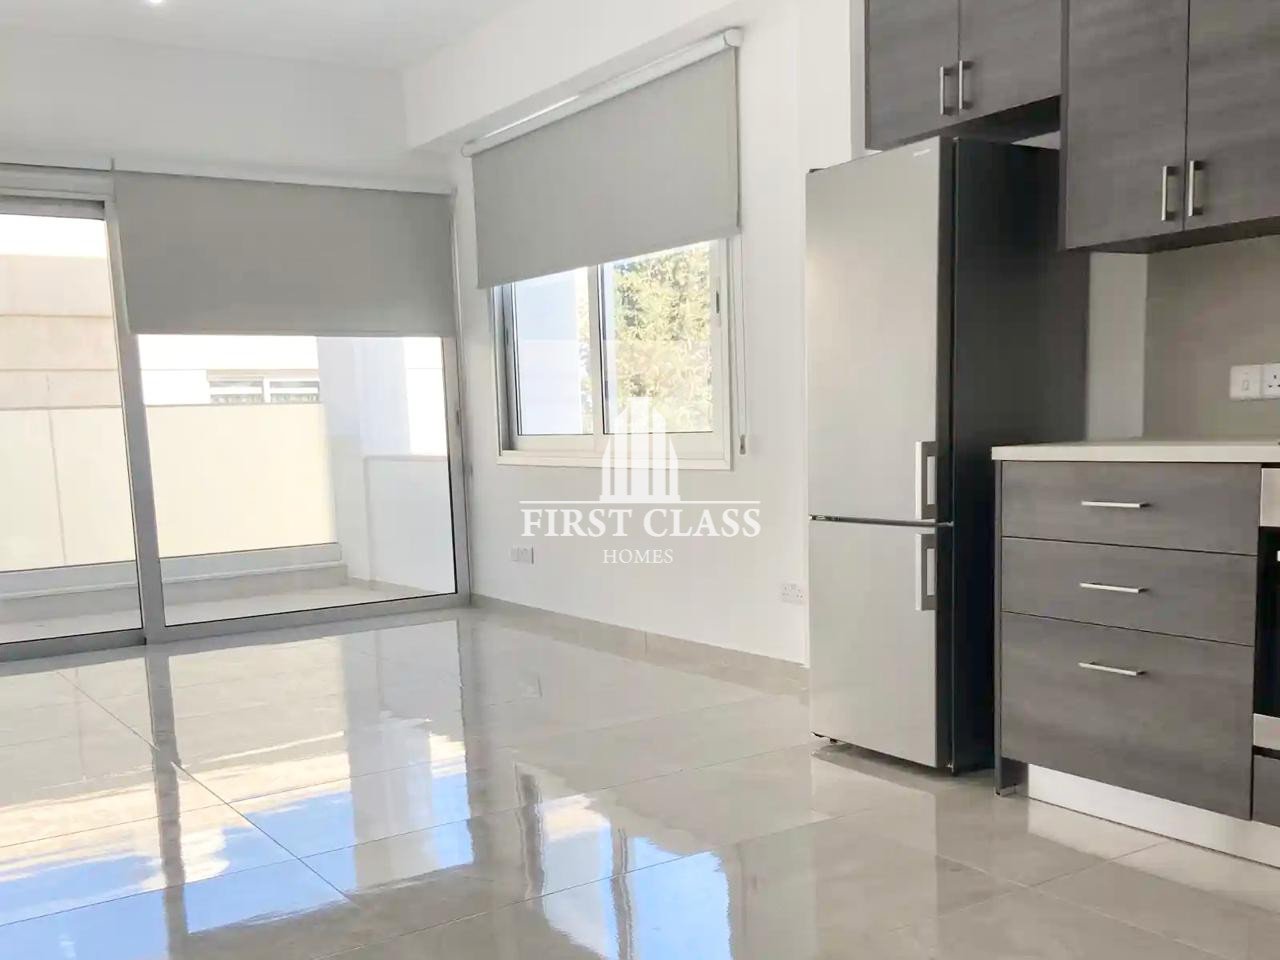 Property for Rent: Apartment (Flat) in Latsia, Nicosia for Rent | Key Realtor Cyprus